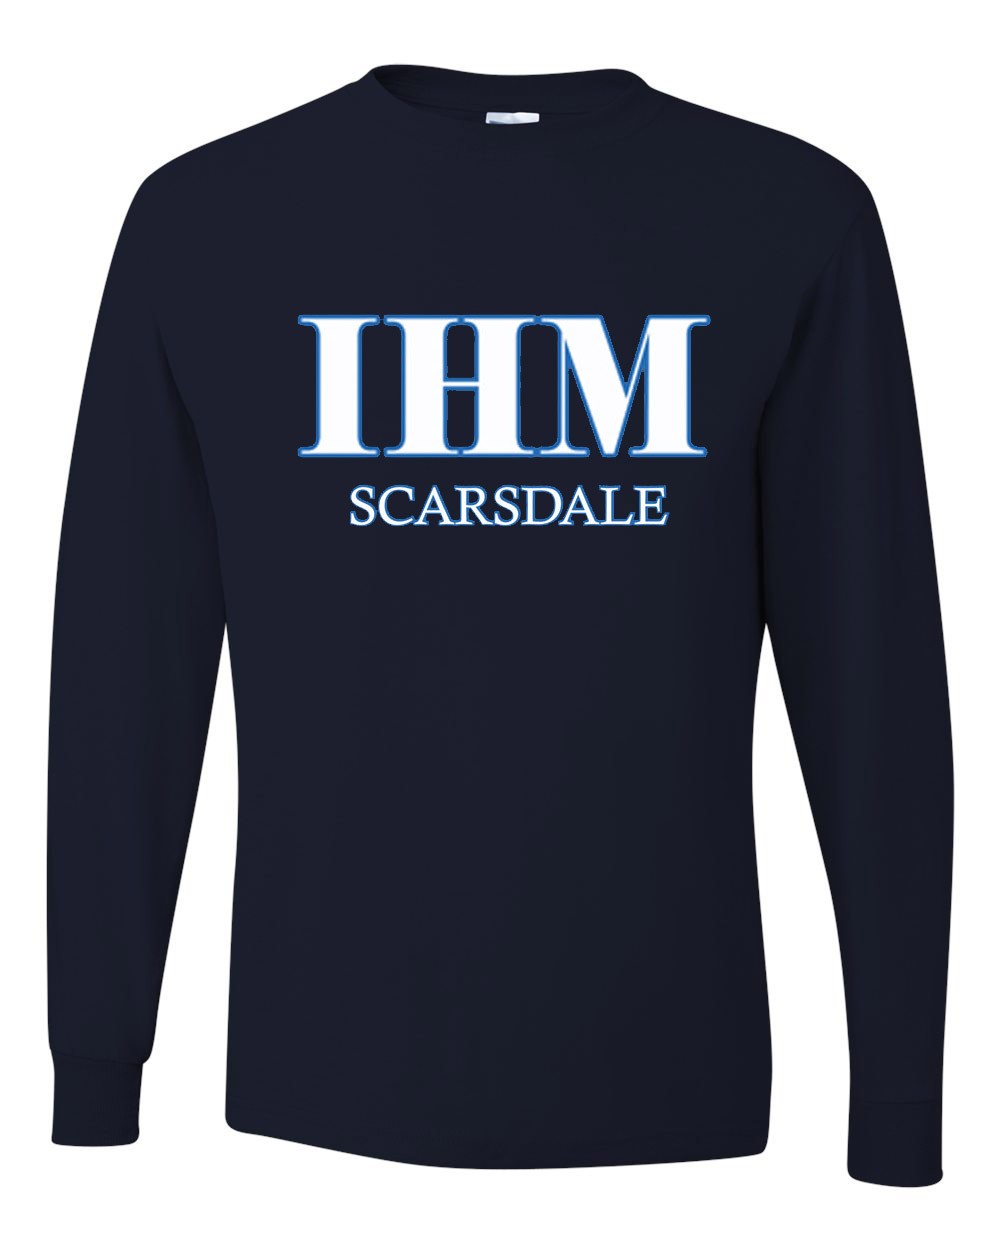 IHM Spirit L/S T-Shirt w/ IHM Scarsdale Logo - Please Allow 2-3 Weeks for Delivery